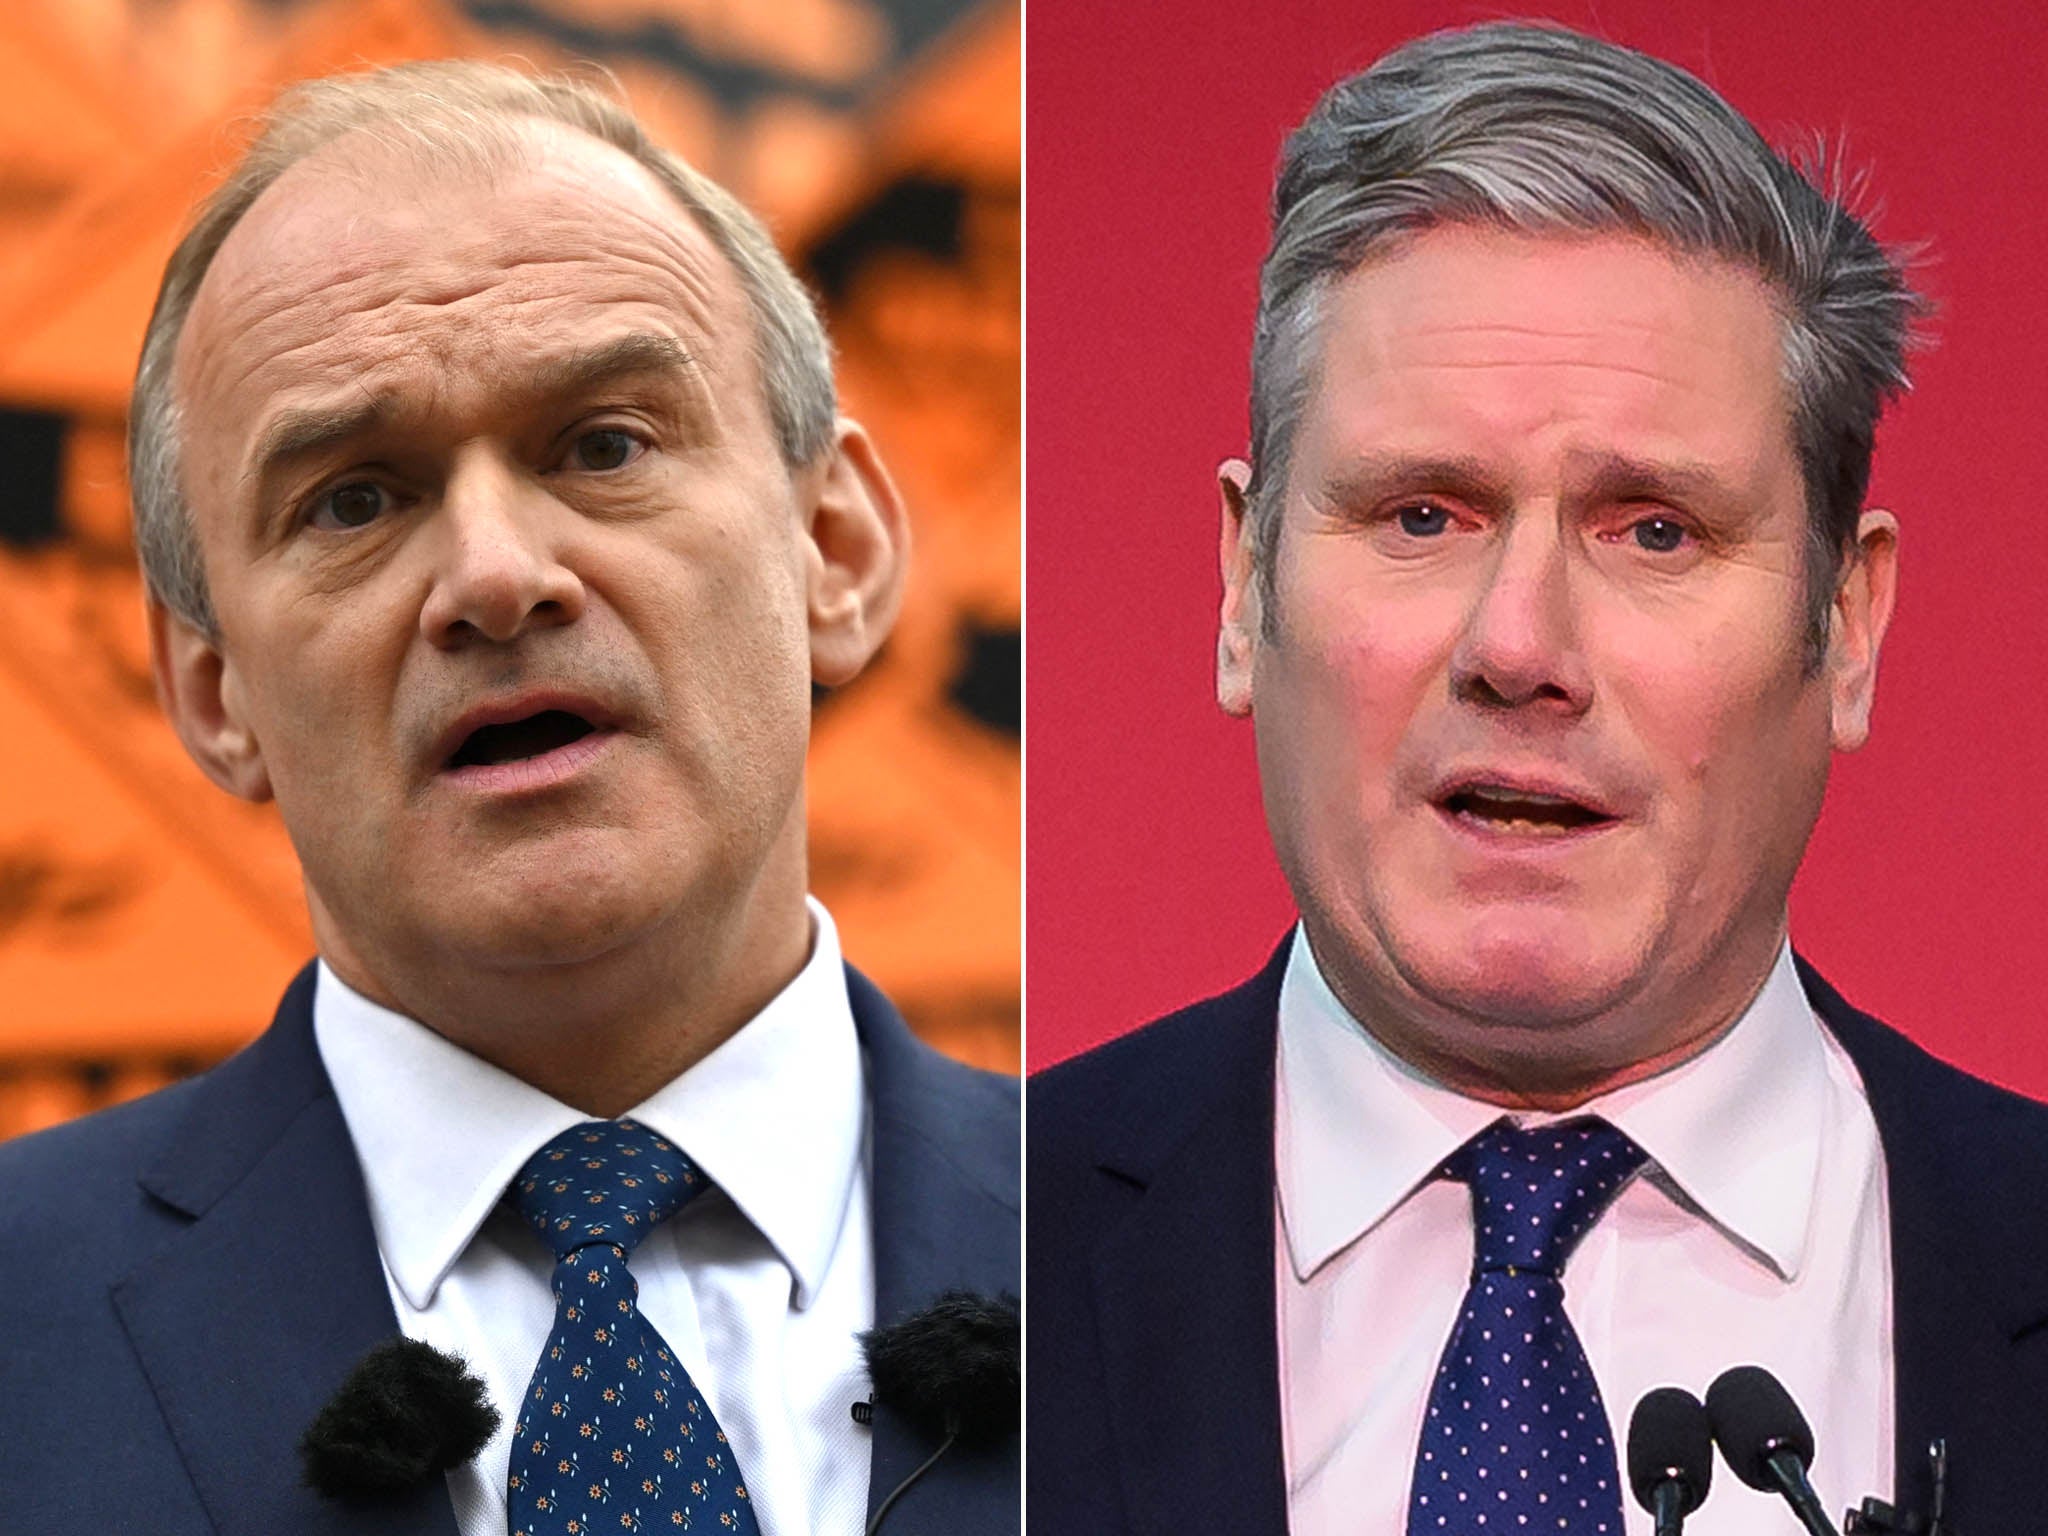 Ed Davey and Keir Starmer have been urged to agree a deal in which one party would ease off campaigning in an effort to avoid splitting the anti-Tory vote